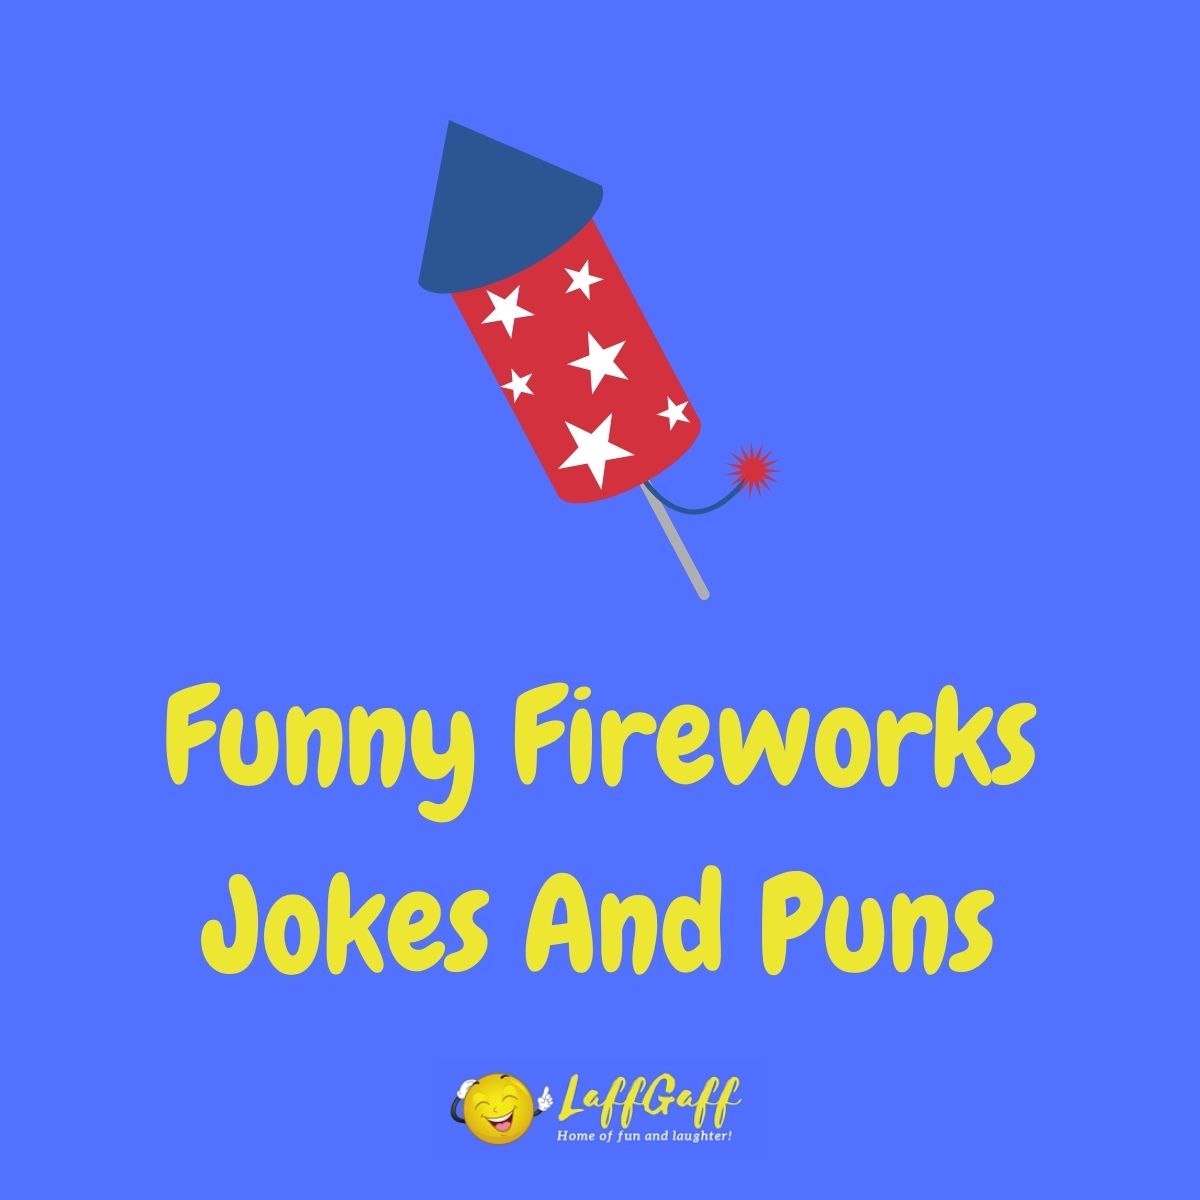 Featured image for a page of funny fireworks jokes and puns.